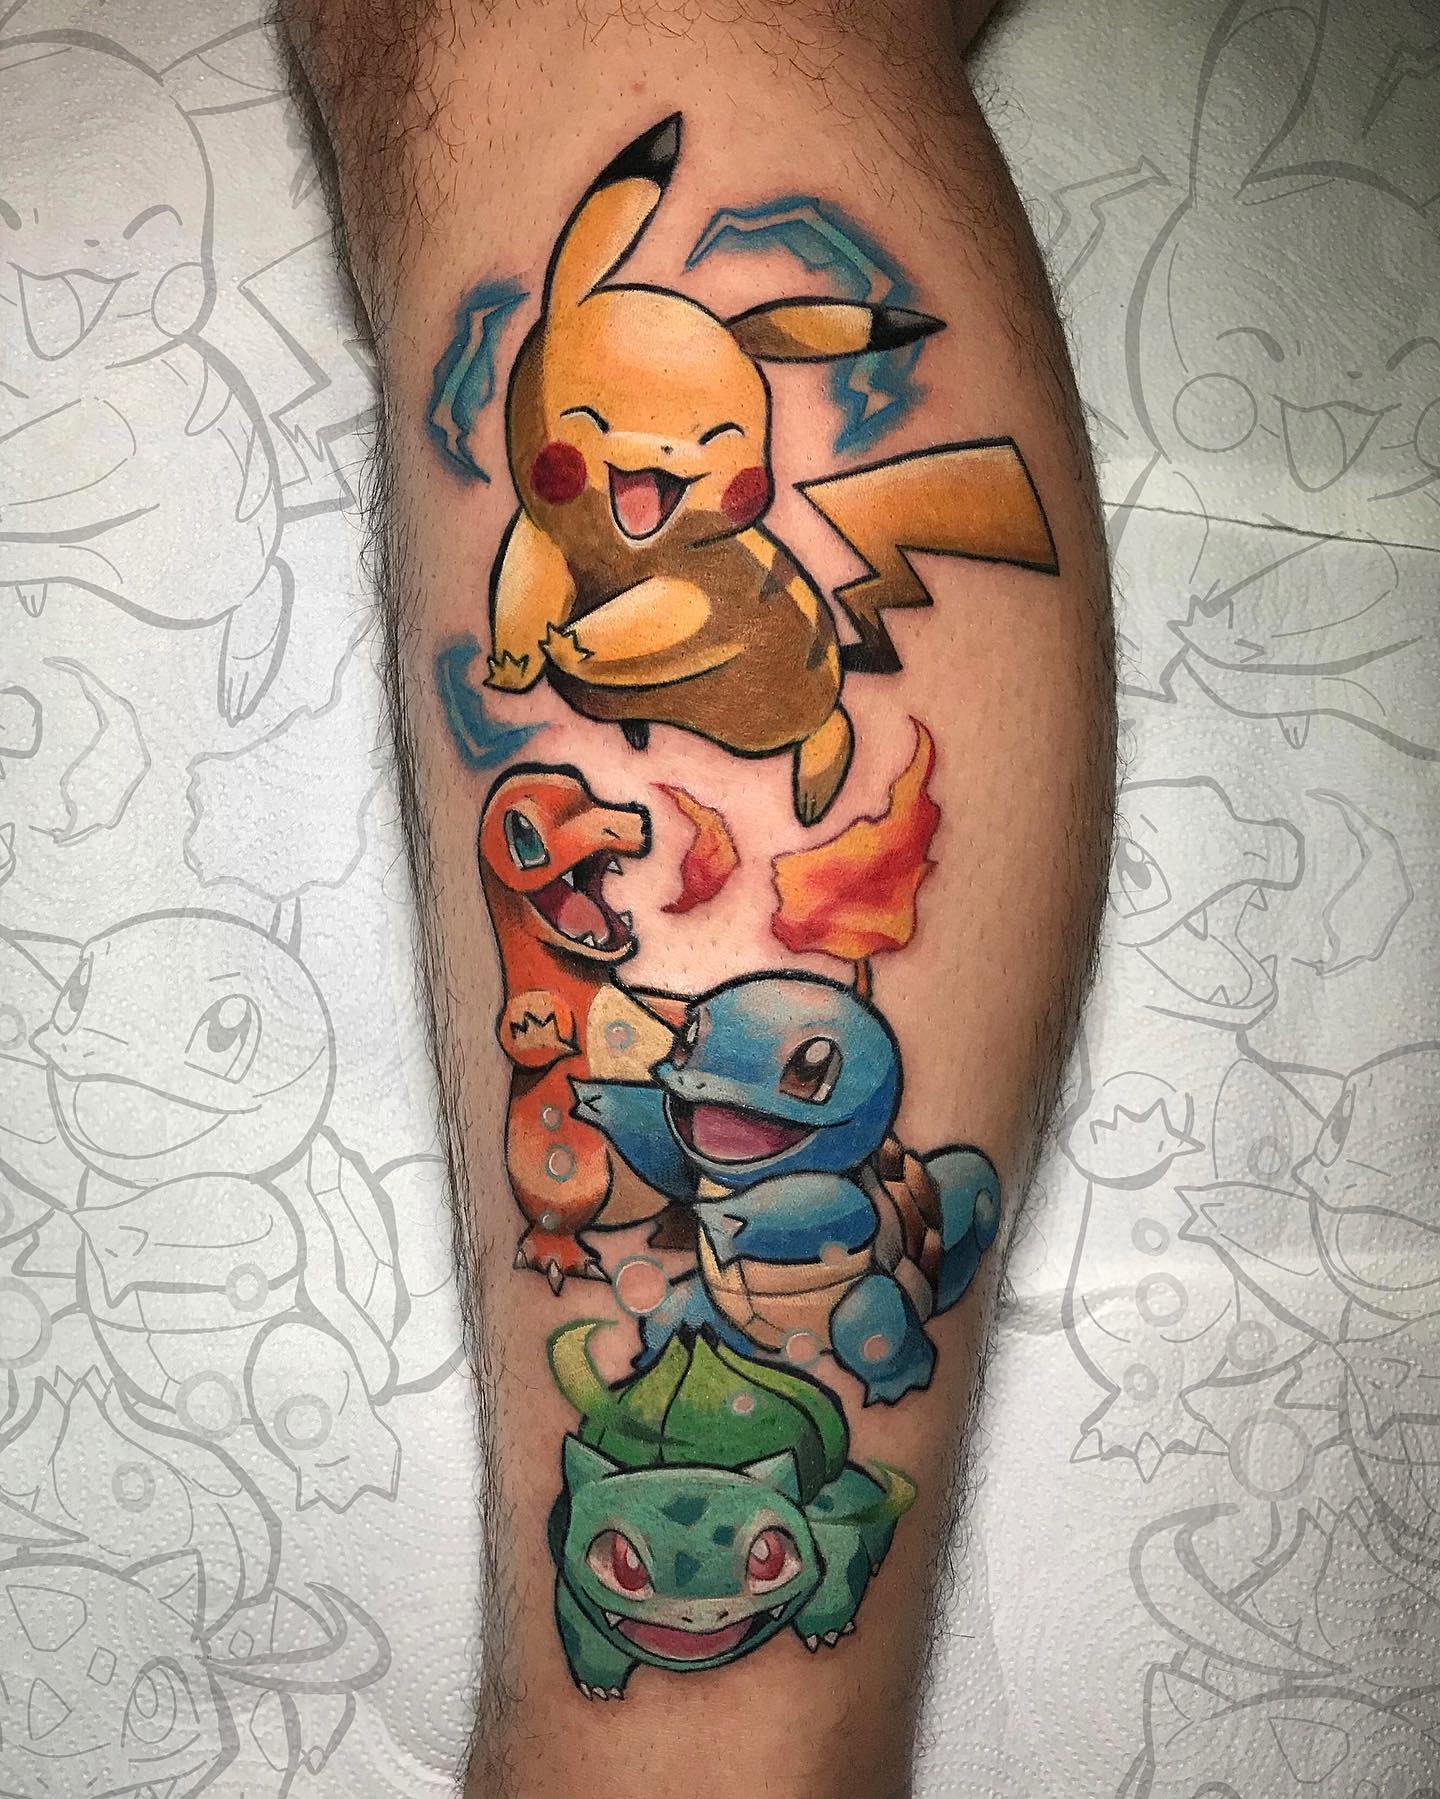 Pokemon tattoos are a popular choice for tattoo enthusiasts. If you can't decide on which Pokemon character to ink on your body, why don't you try combining different characters in one tattoo design?